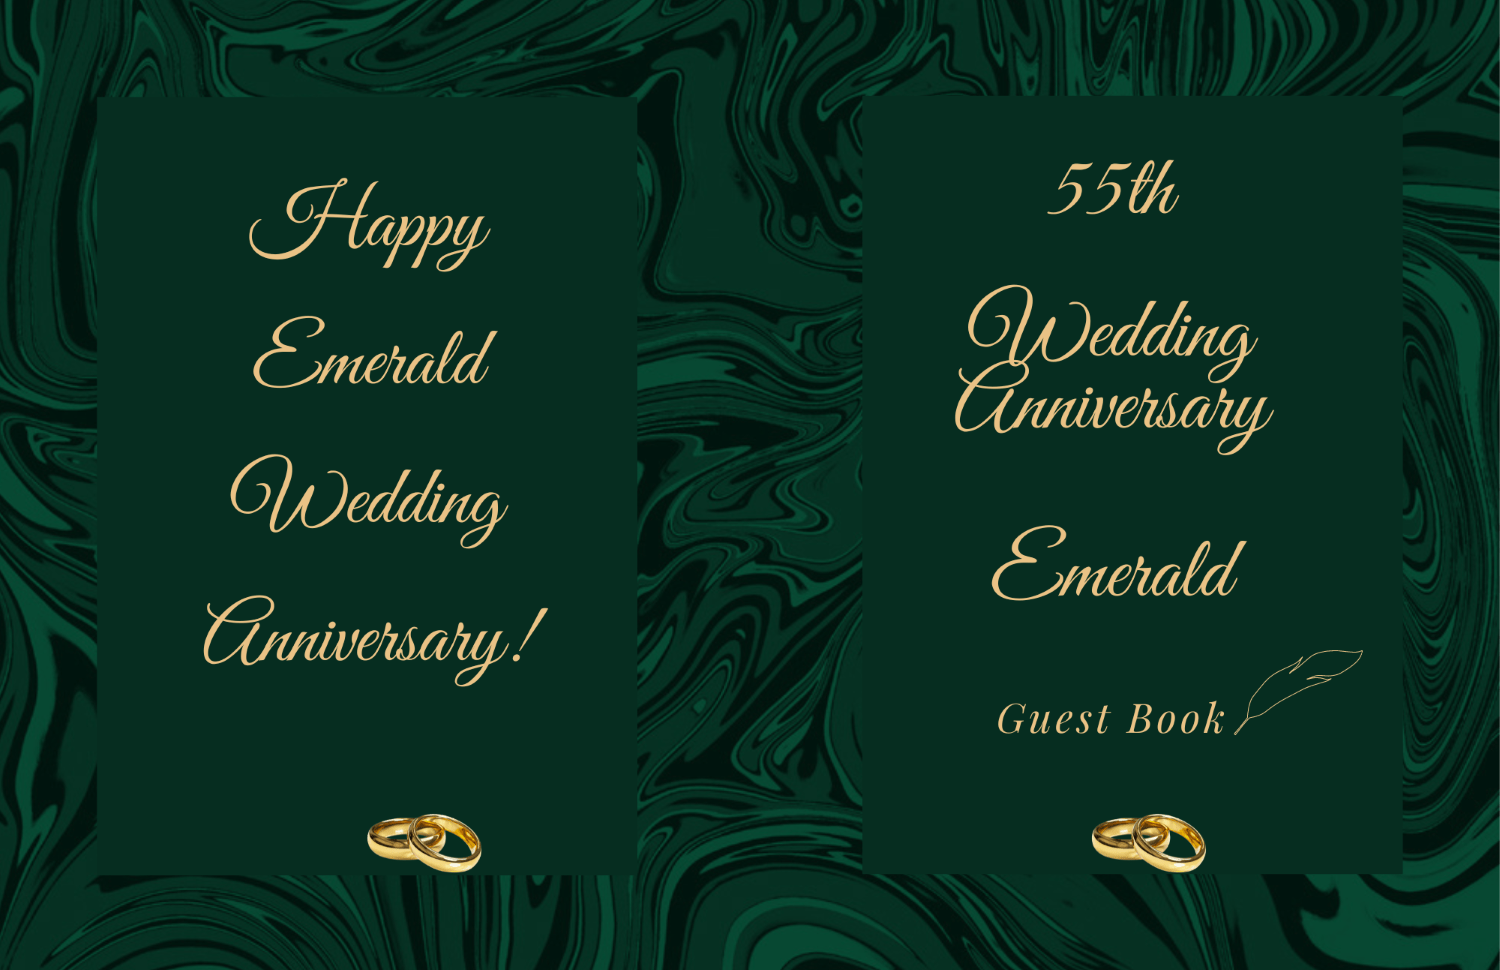 55 Wedding Anniversary Guest Book by P.B. Young